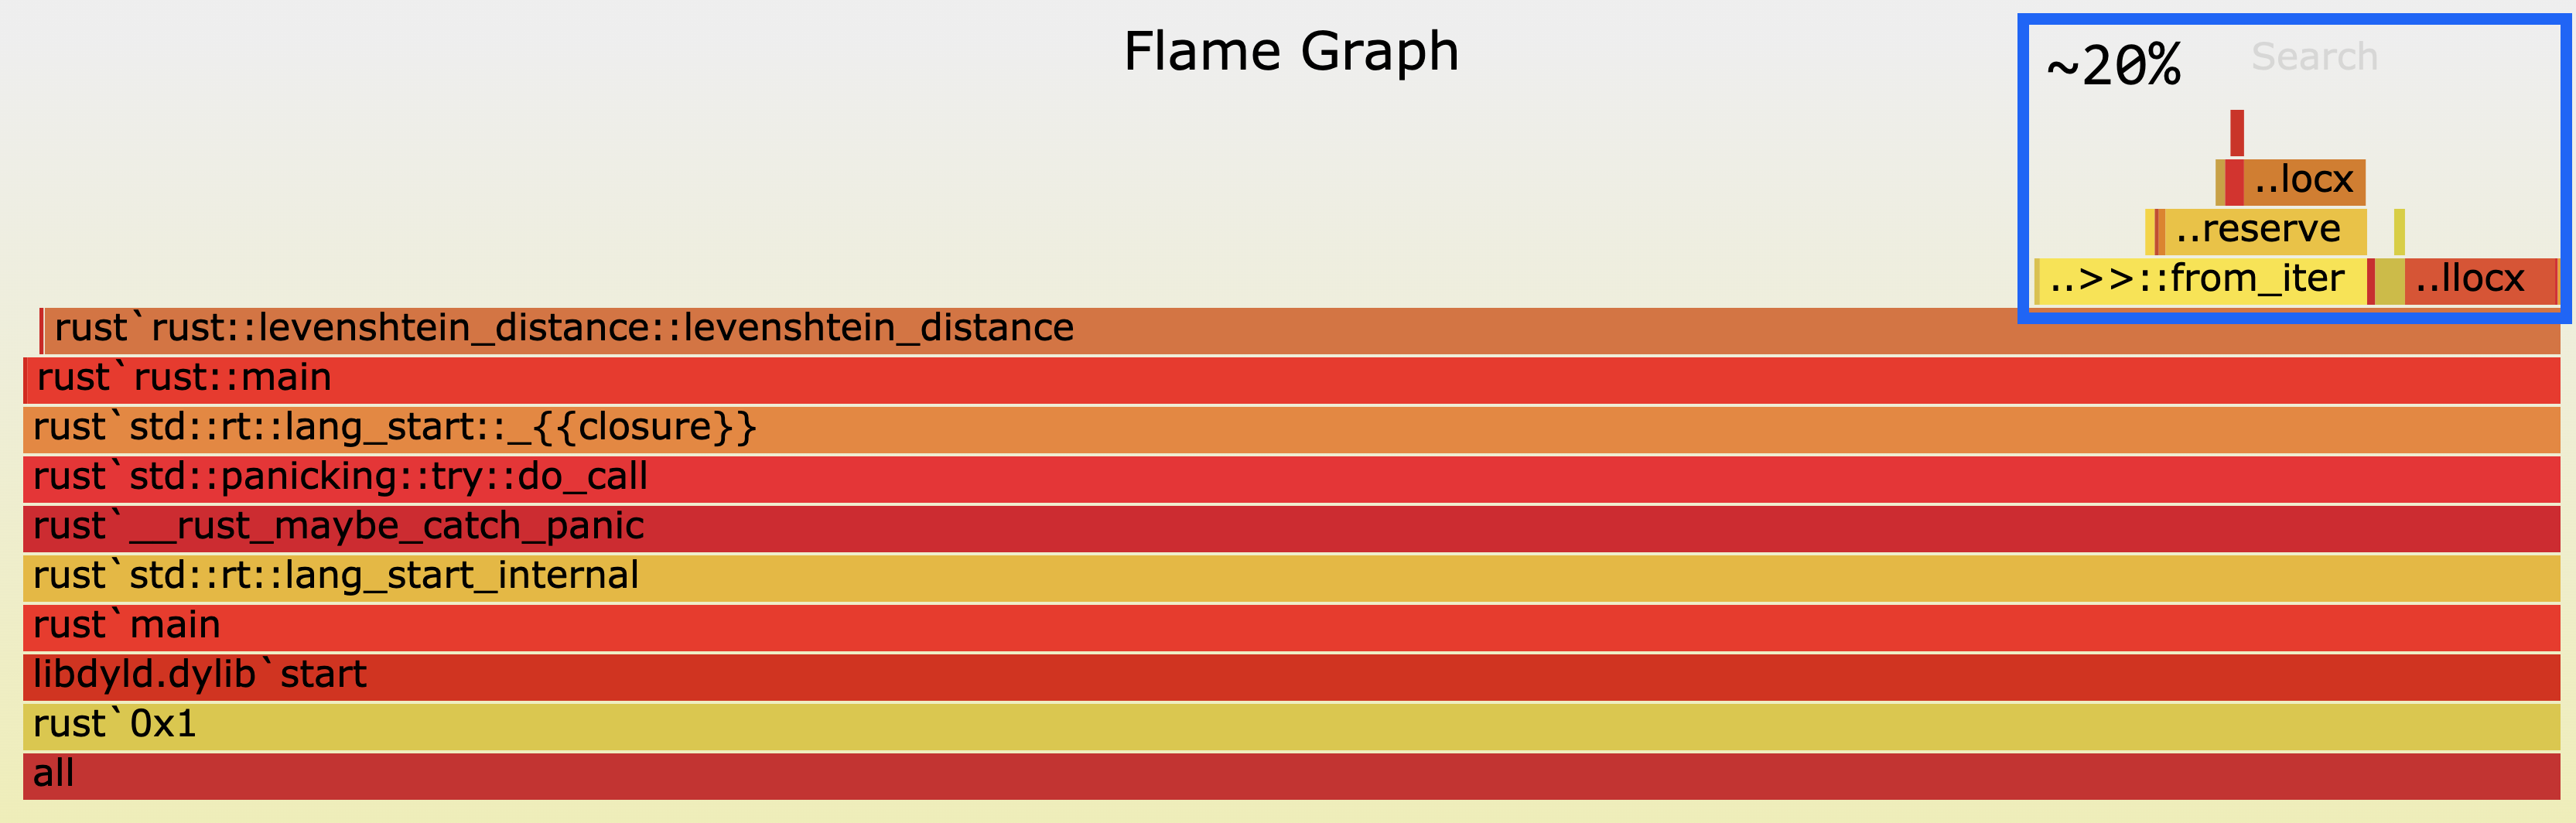 Flamegraph after allocator was changed to jemalloc. Time spent allocating dropped to 20%